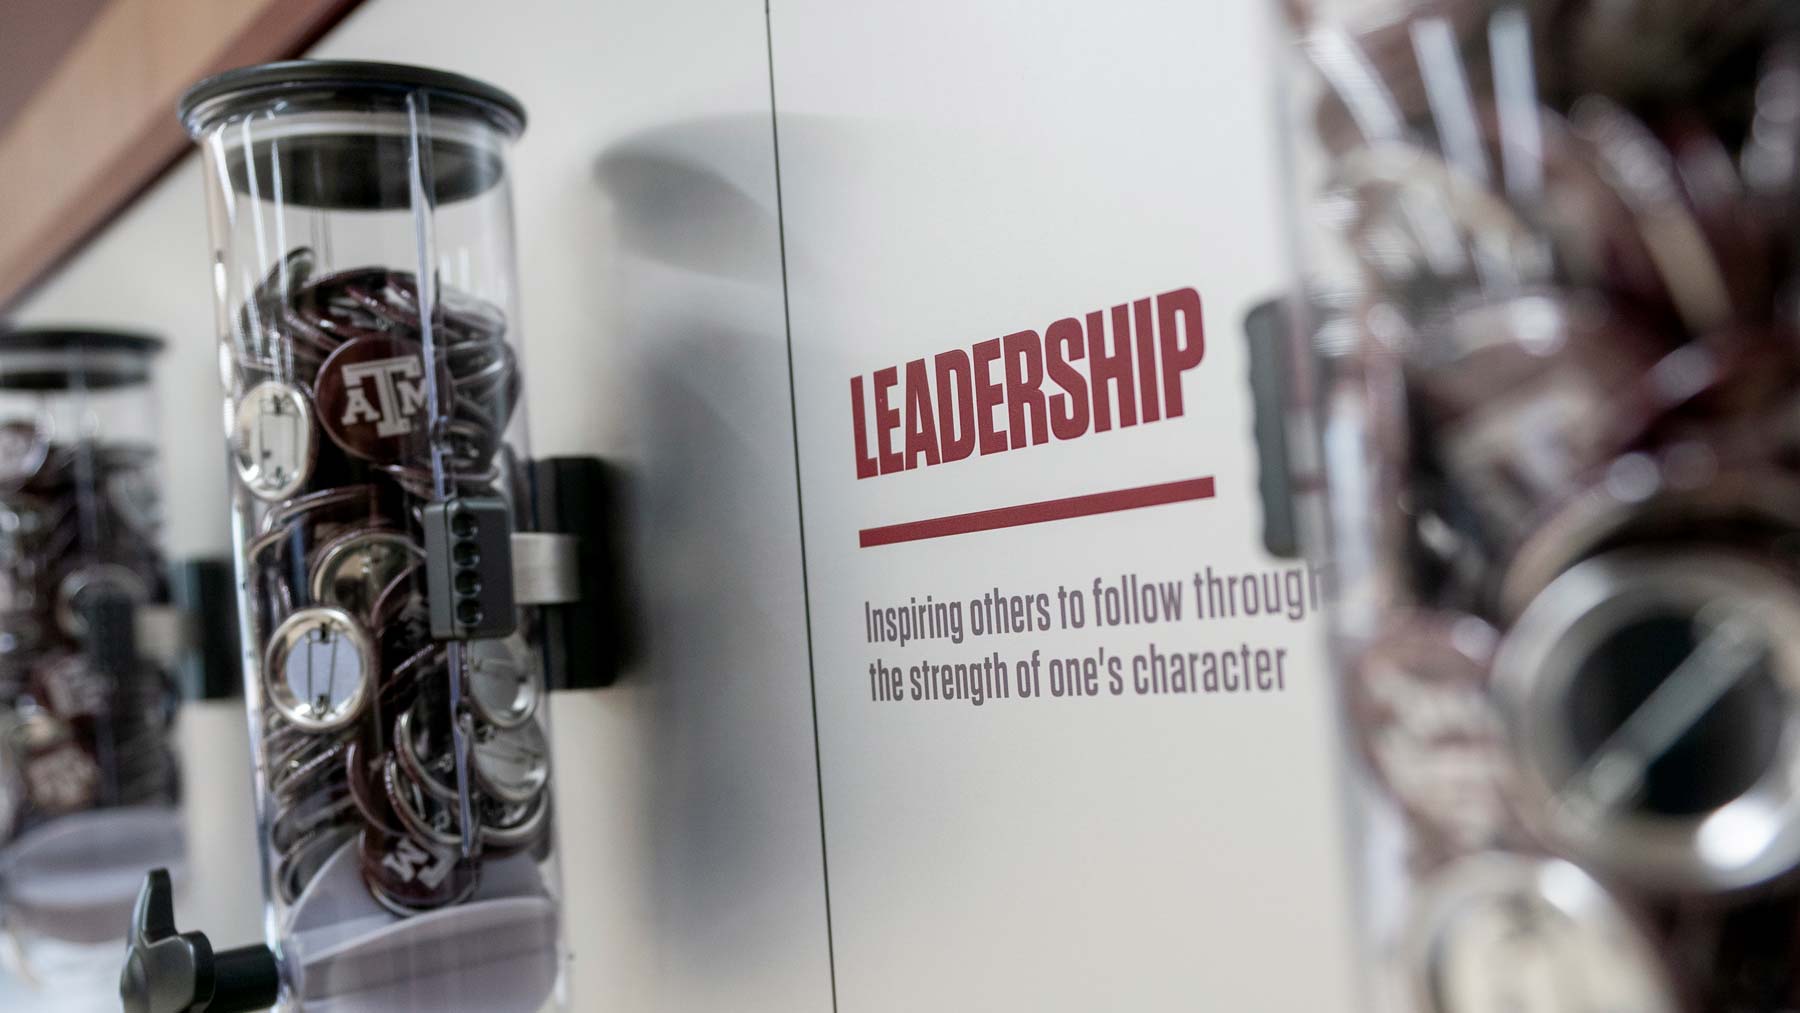 Buttons with the Texas A&M logo on them sit in a plastic container next to a sign that reads: "Leadership: Inspiring others to follow through the strength of one's character"